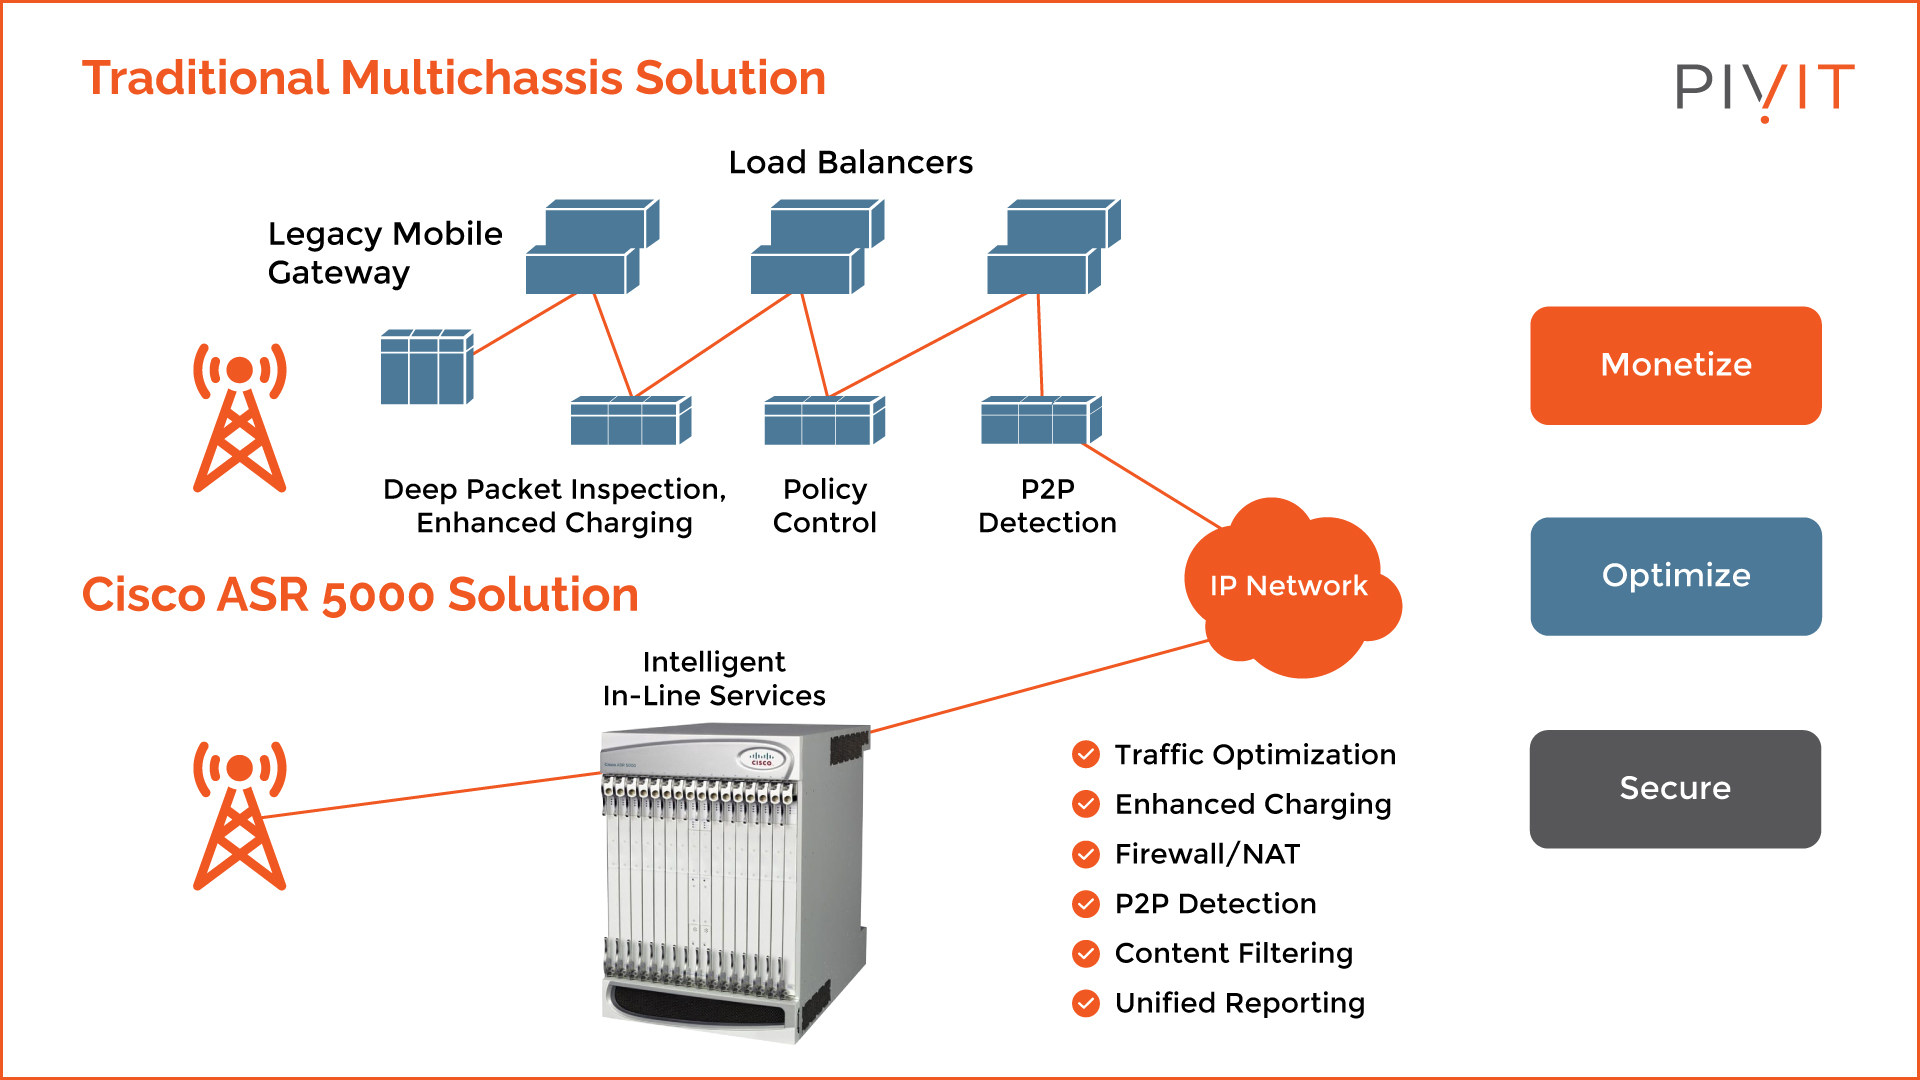 Comparison of a traditional multichassis solution and the Cisco ASR 5000 solution